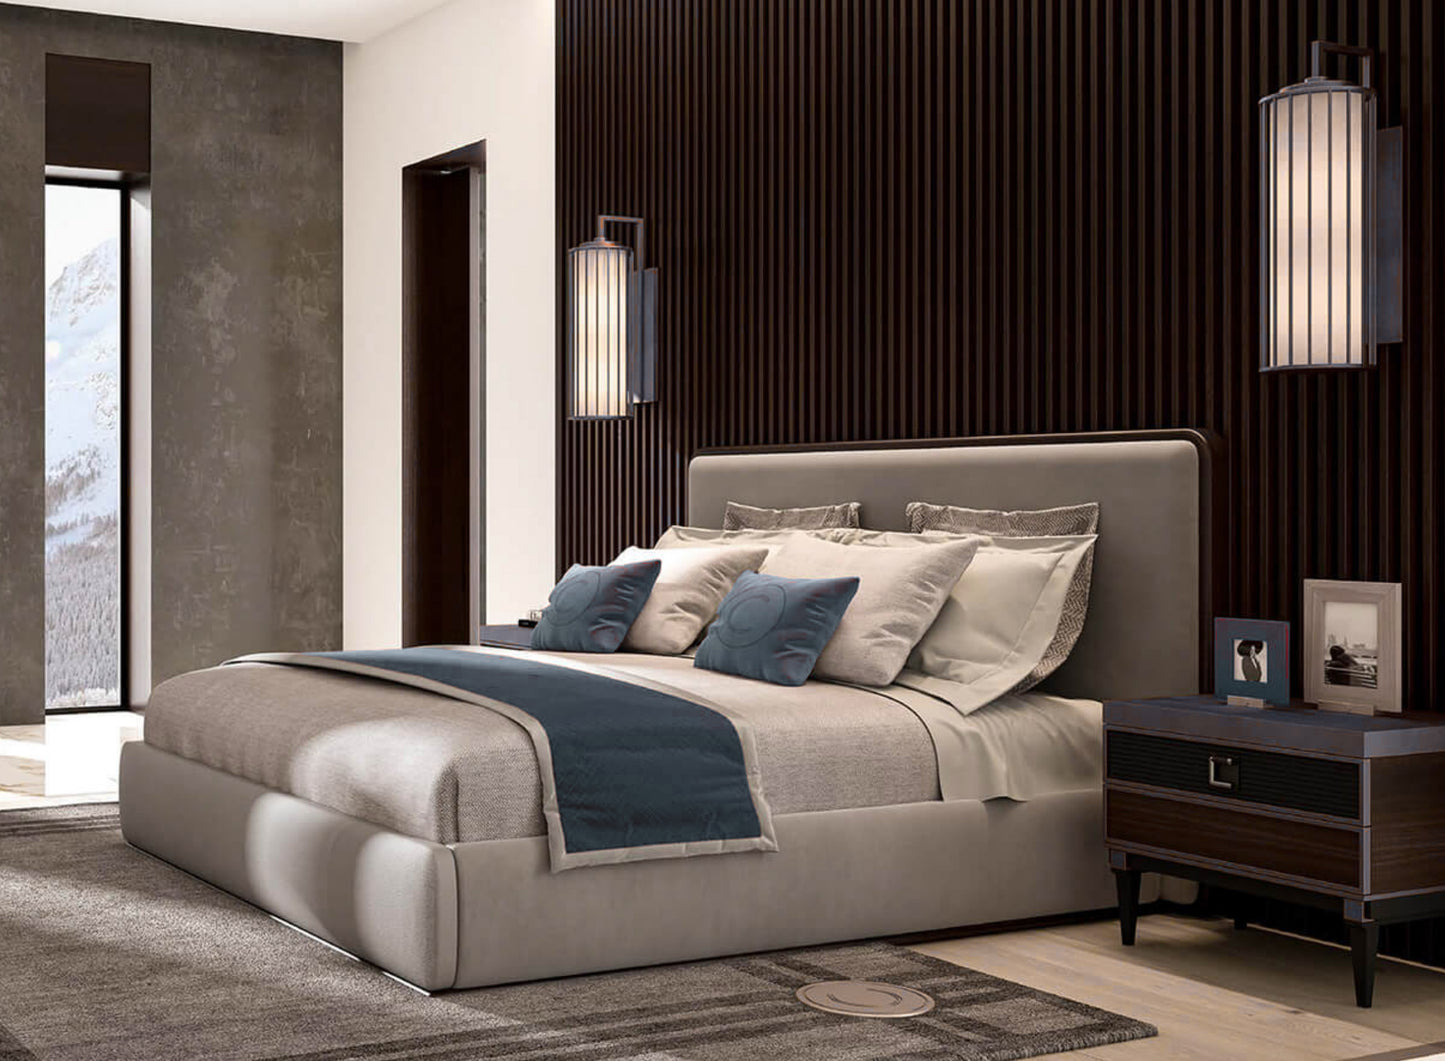 SENSO | Bed by CPRN - $10,160.00 - $13,984.50